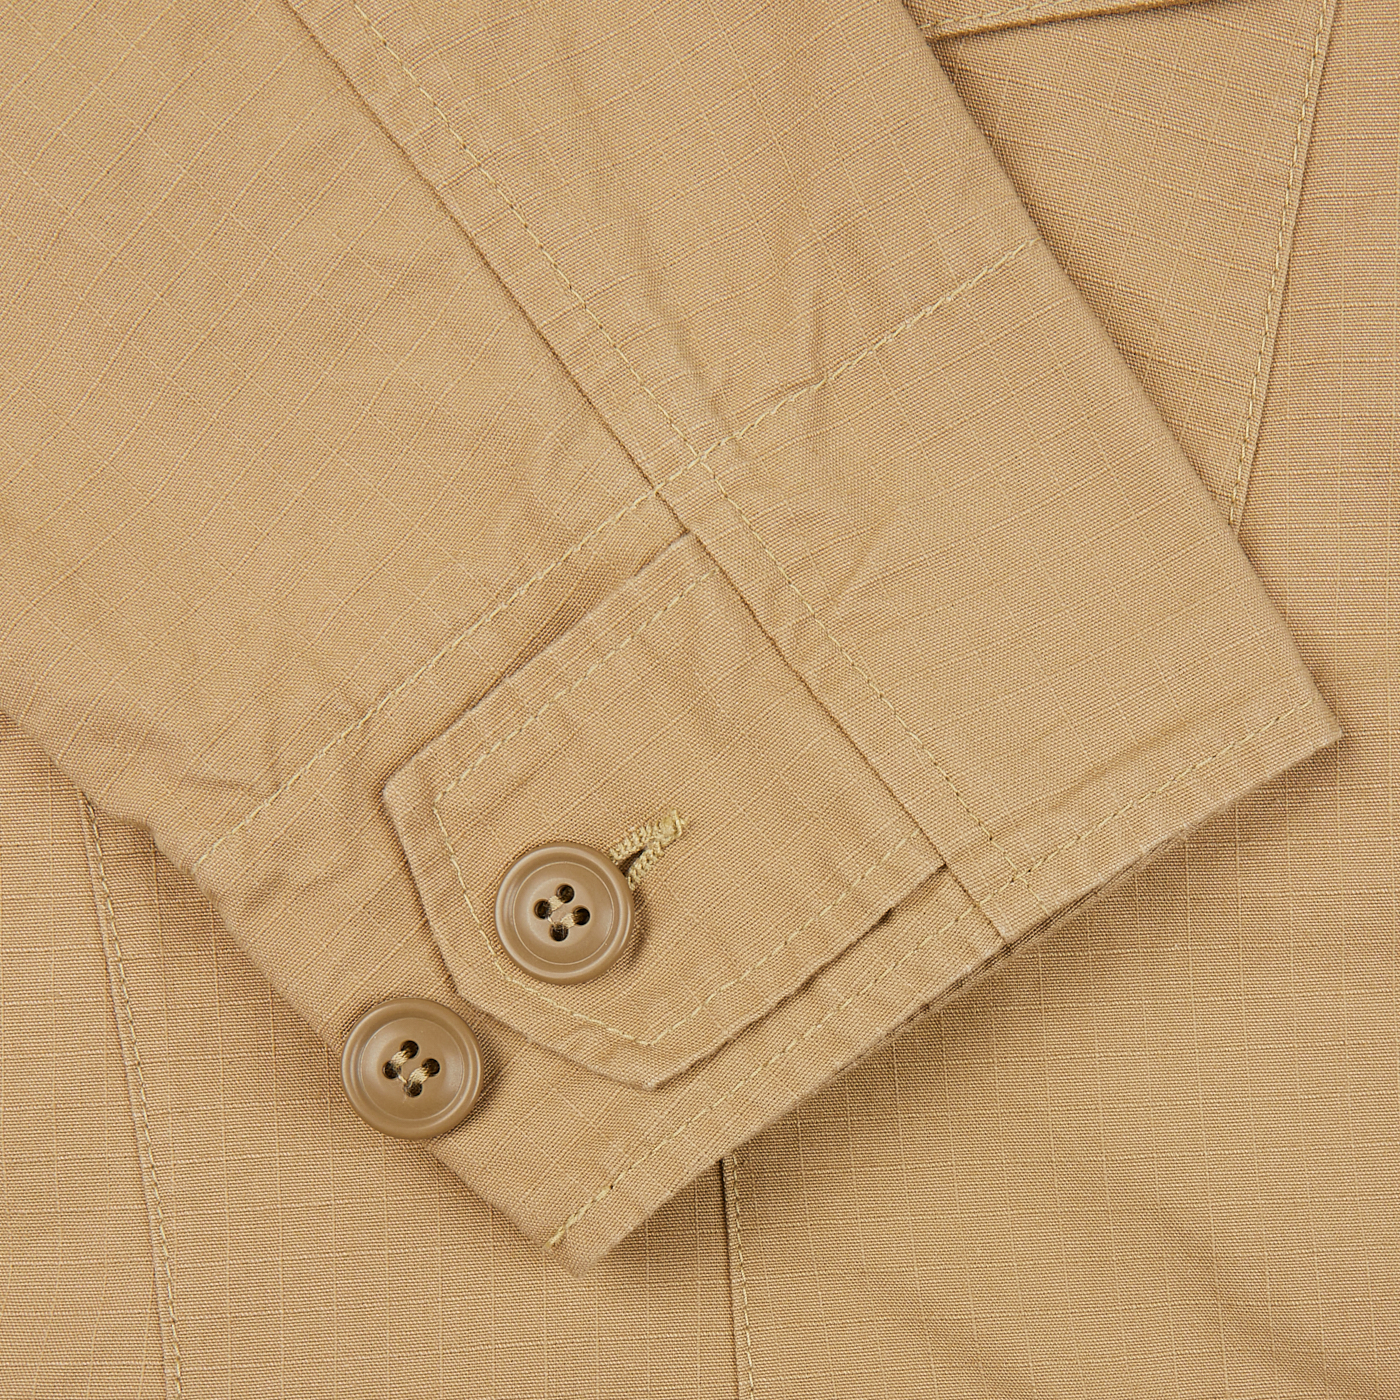 A close up of a Camel Beige Ripstop Cotton Bush Jacket by Manifattura Ceccarelli with buttons made from ripstop cotton.